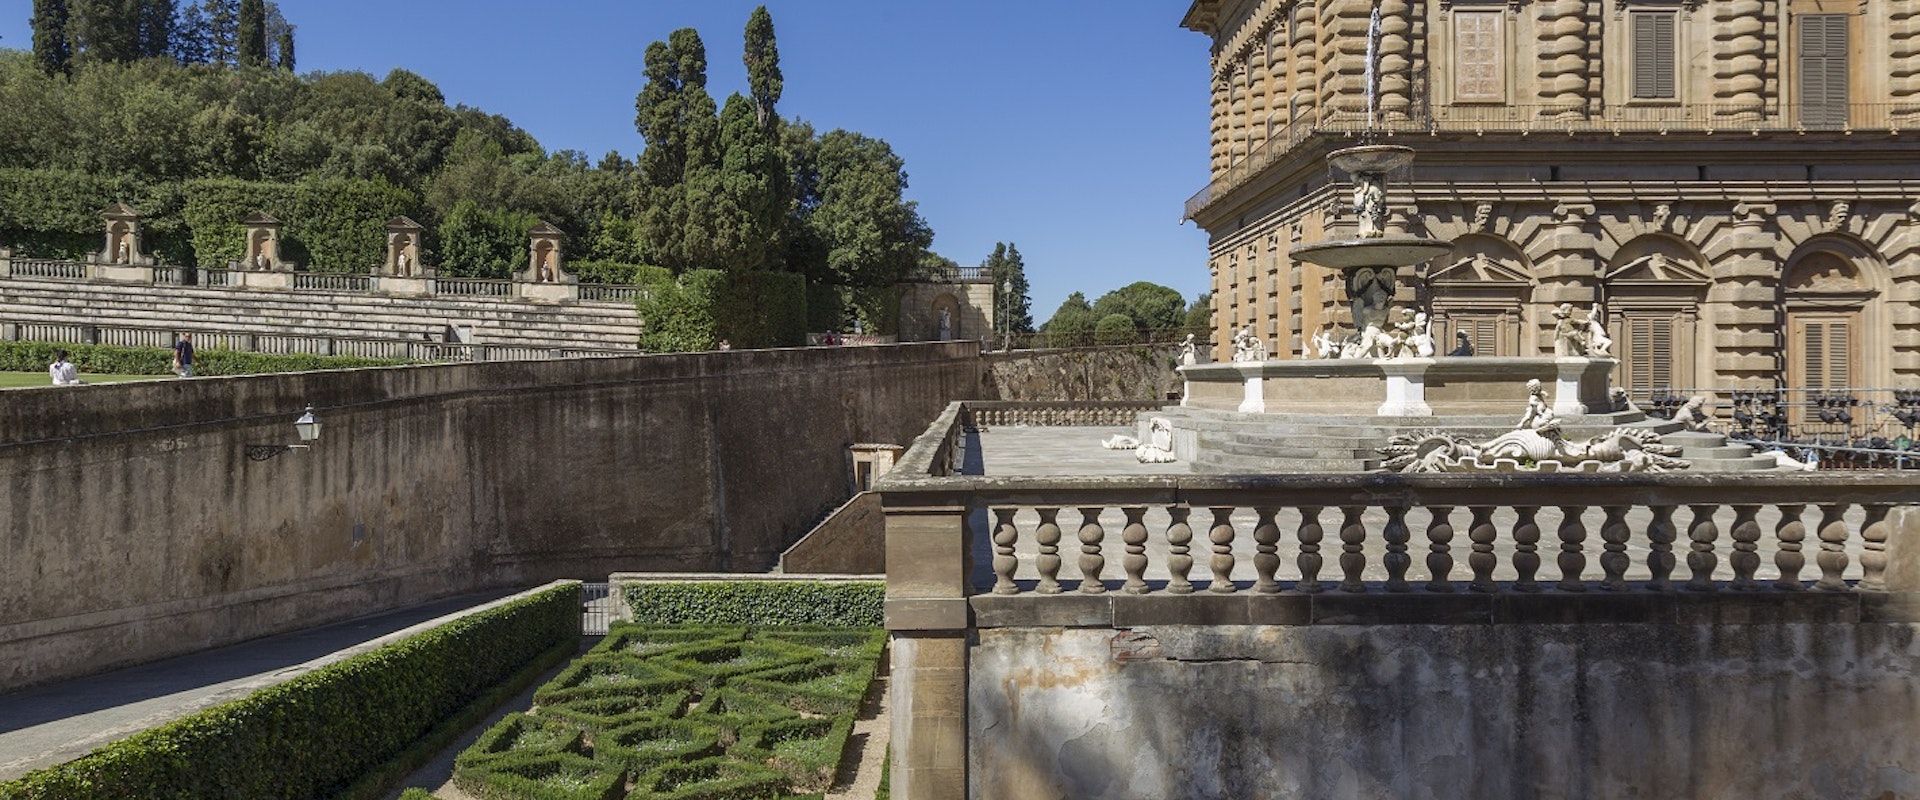 17th March at the museum: free admission to Pitti Palace and the Boboli Gardens!